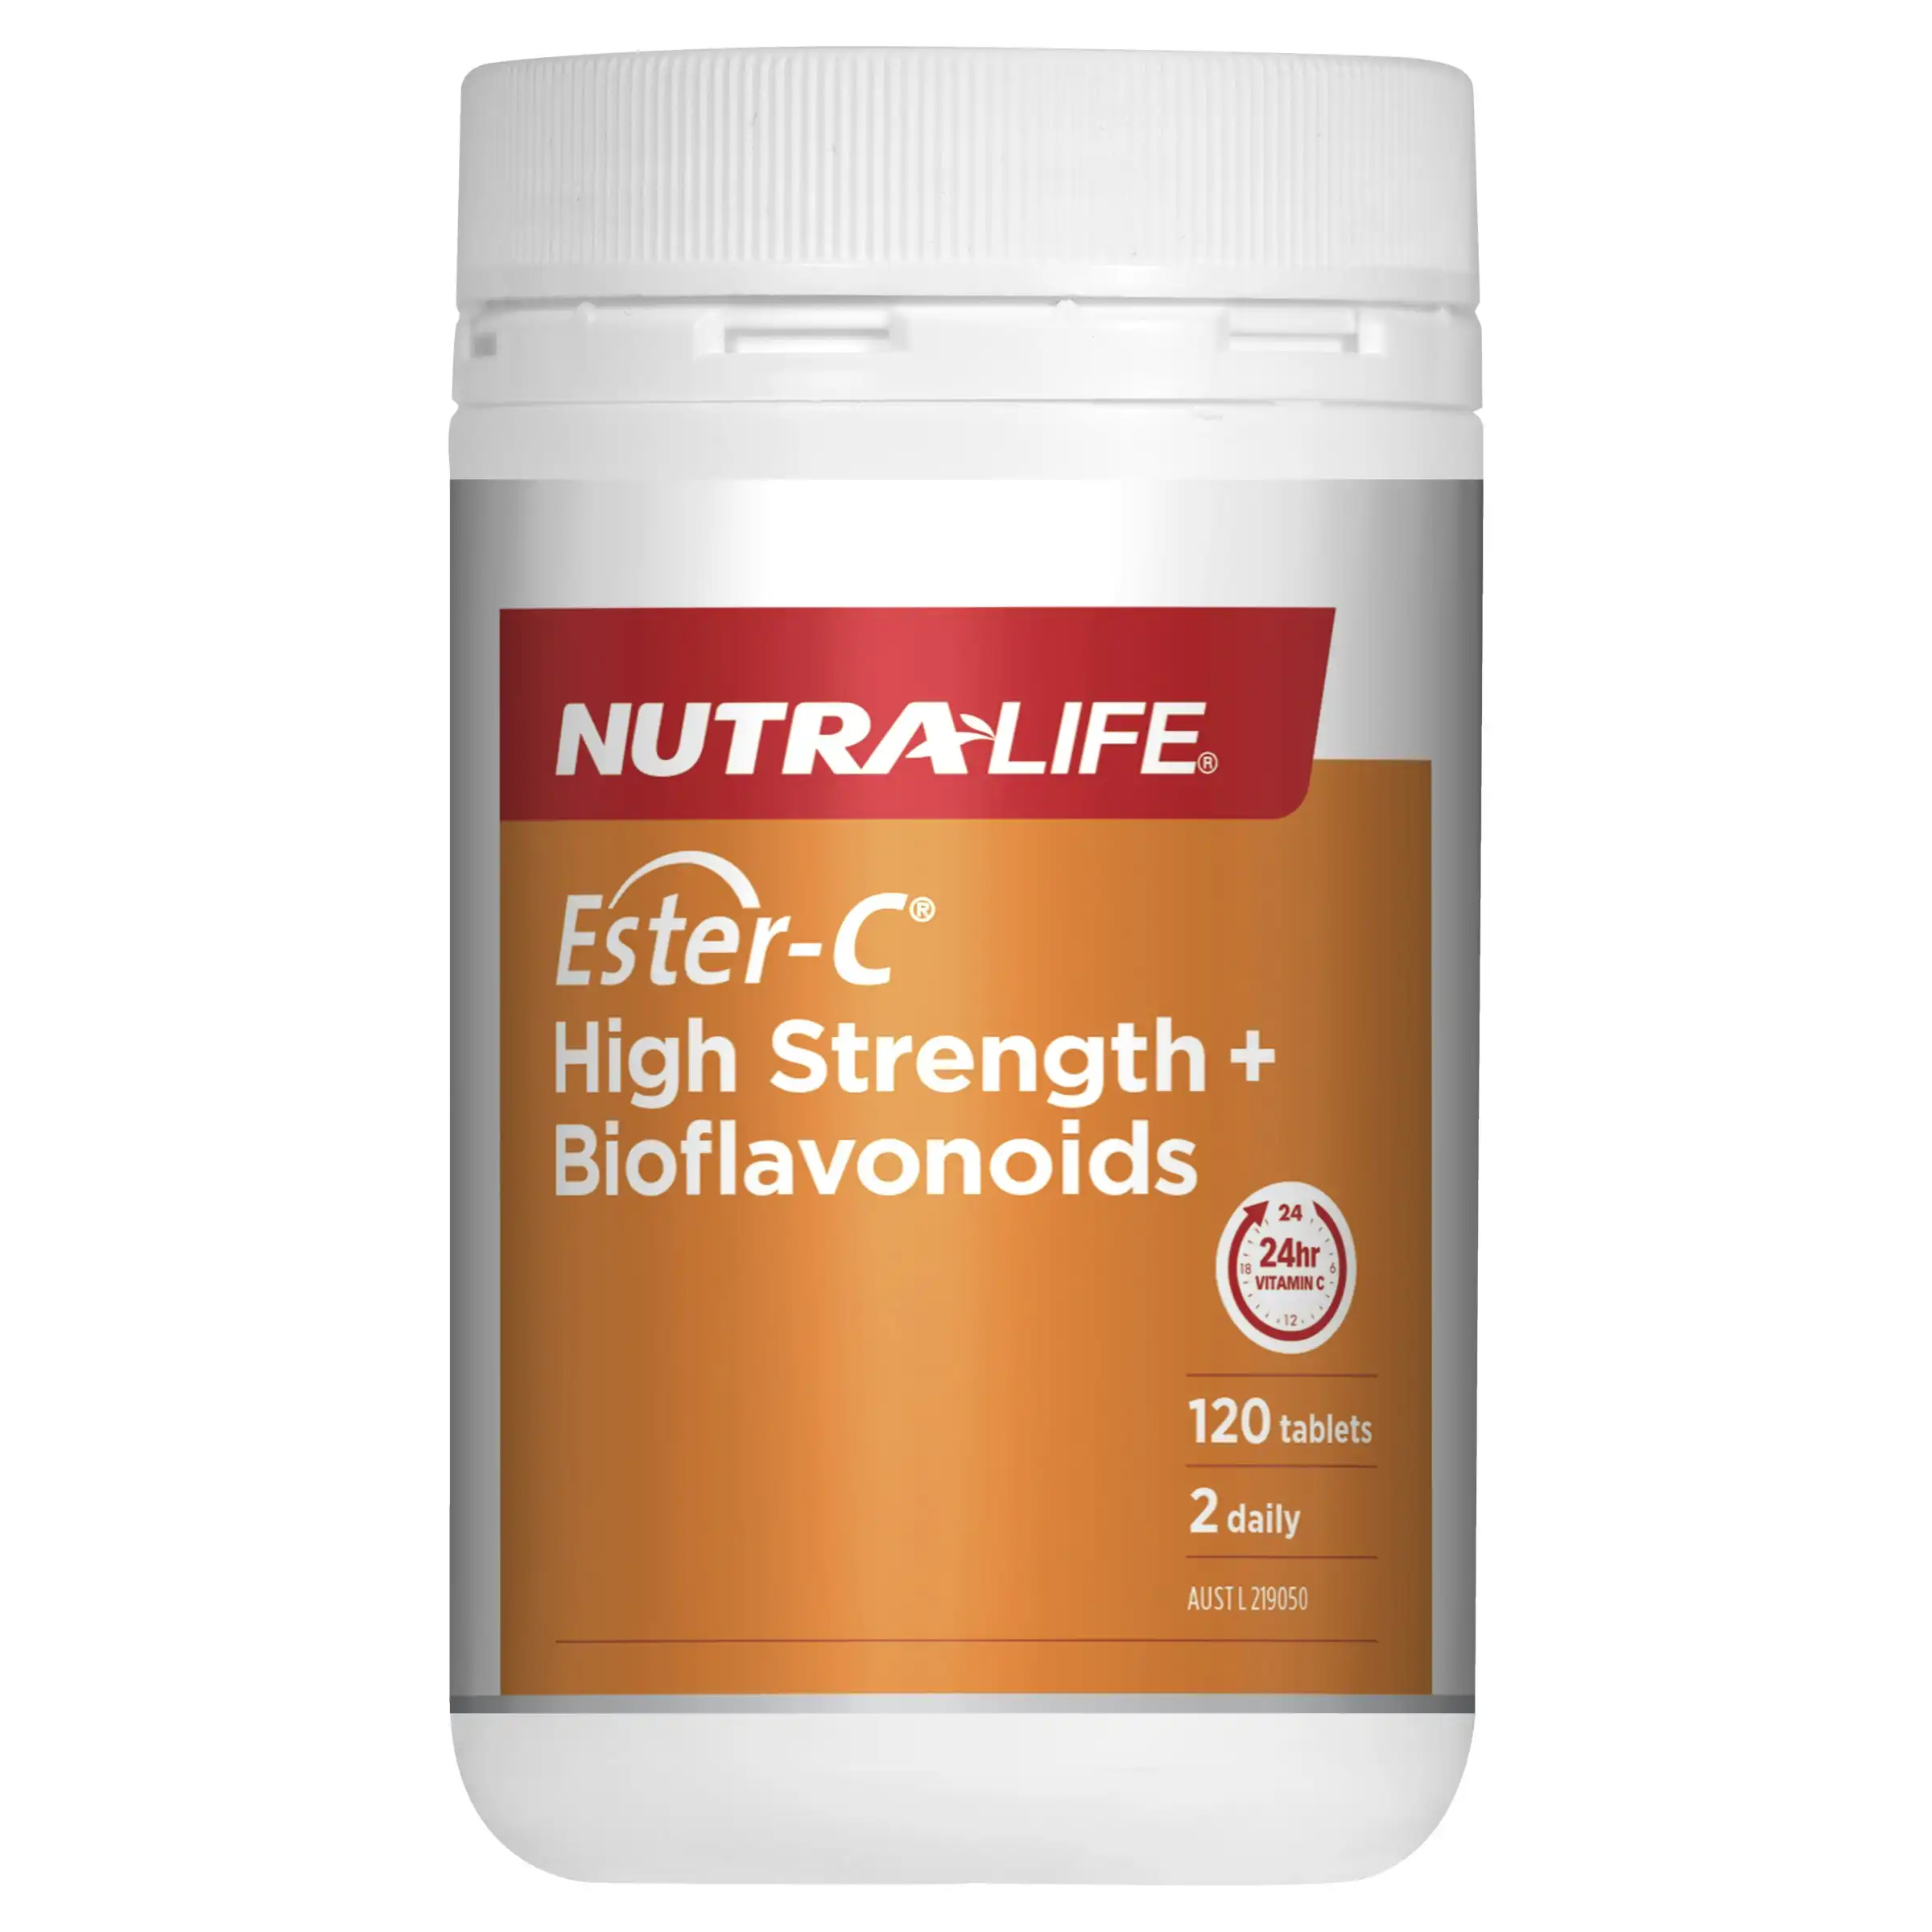 Nutra-Life Ester-C(R) 1500mg + Bioflavonoids 120 Tablets